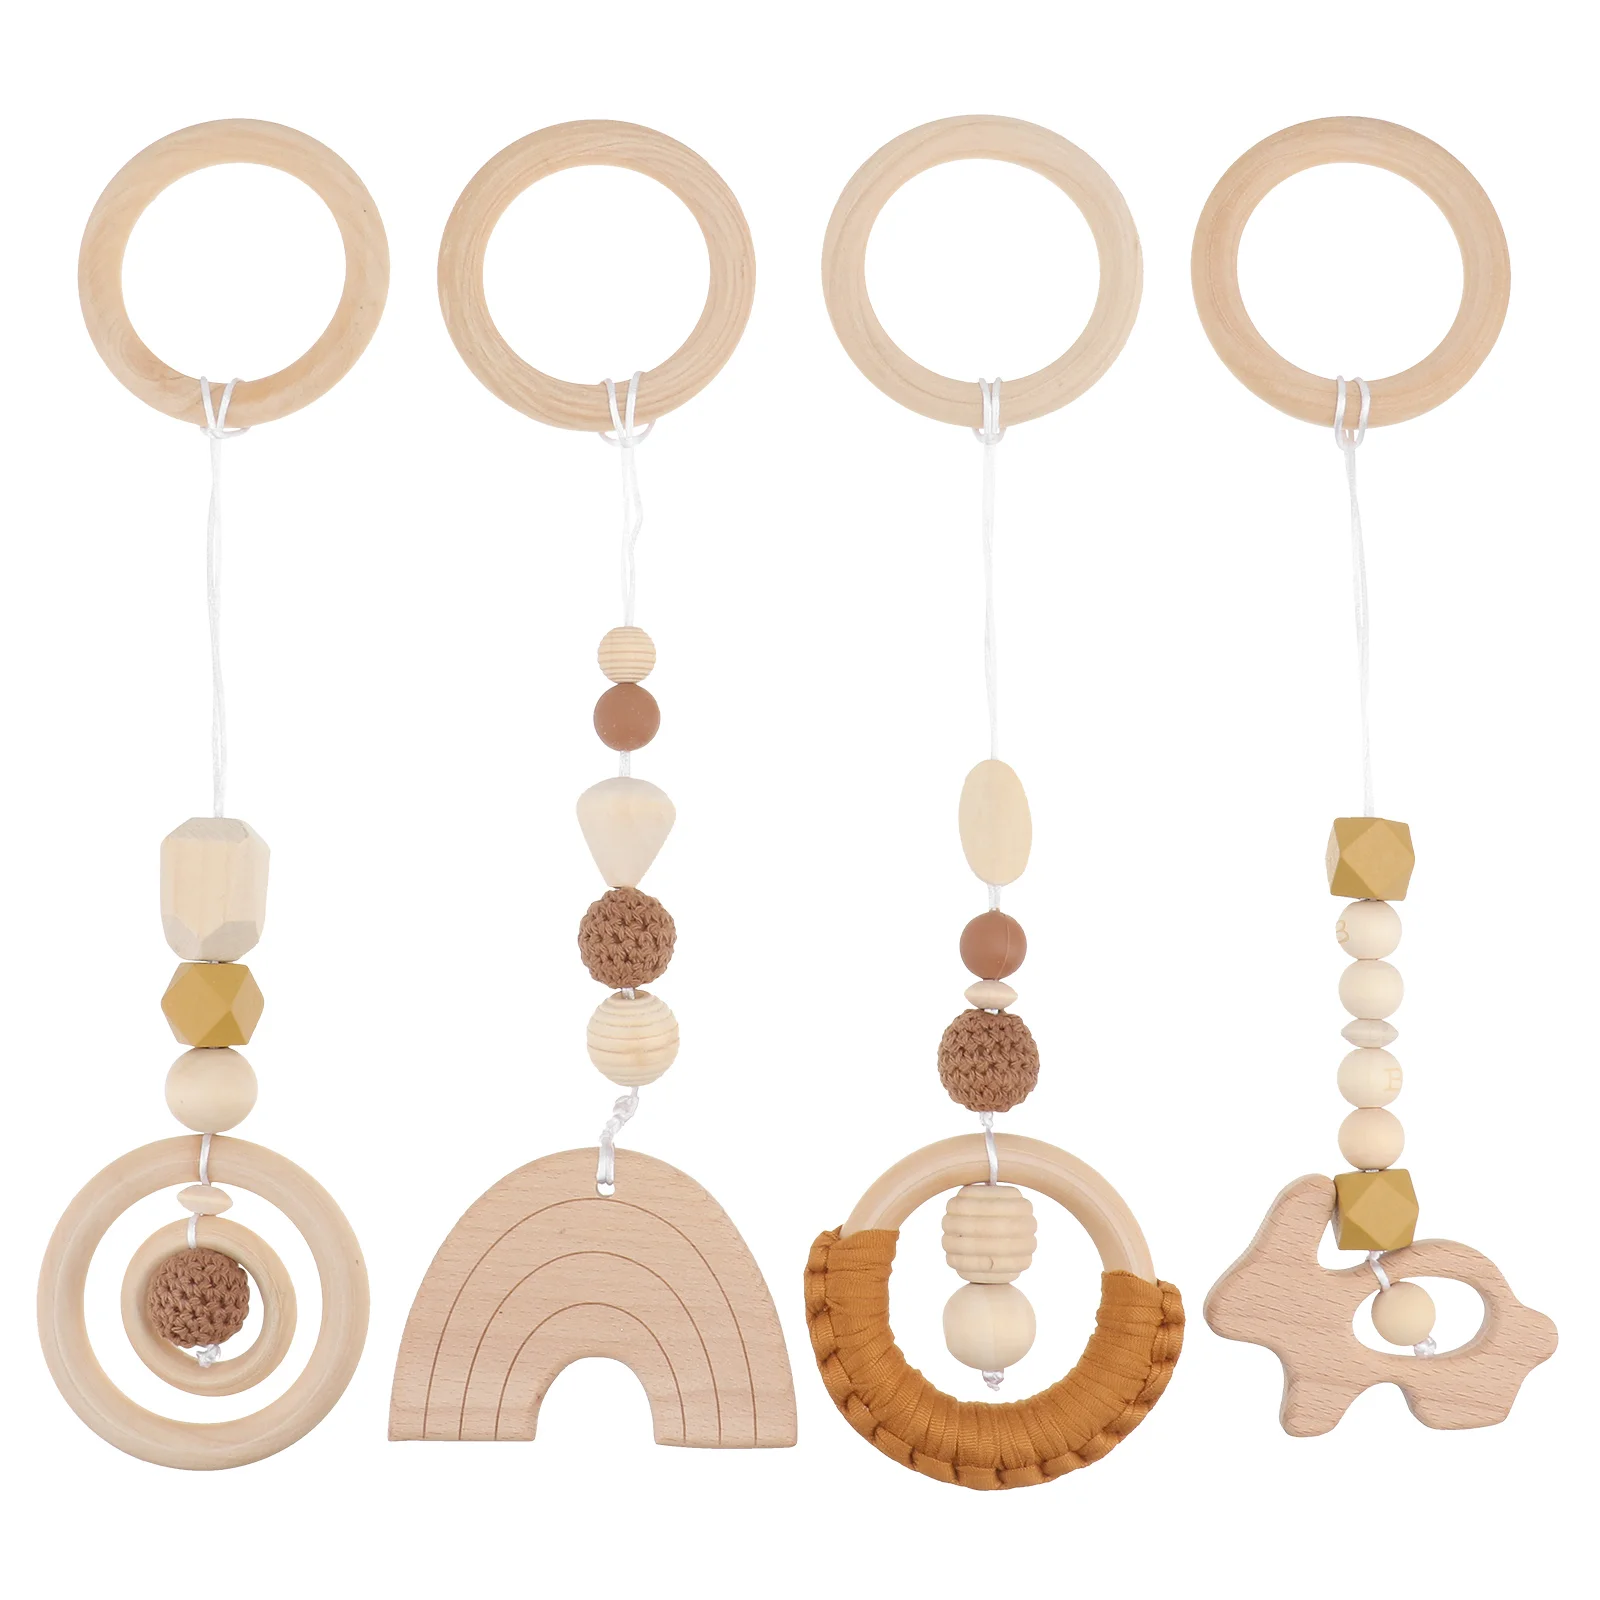 

Baby Gym Wooden Toys Teether Play Teething Hanging Rings Wood Diy Gyms Activity Decoration Crib Unique Infant Decor Prop Photo